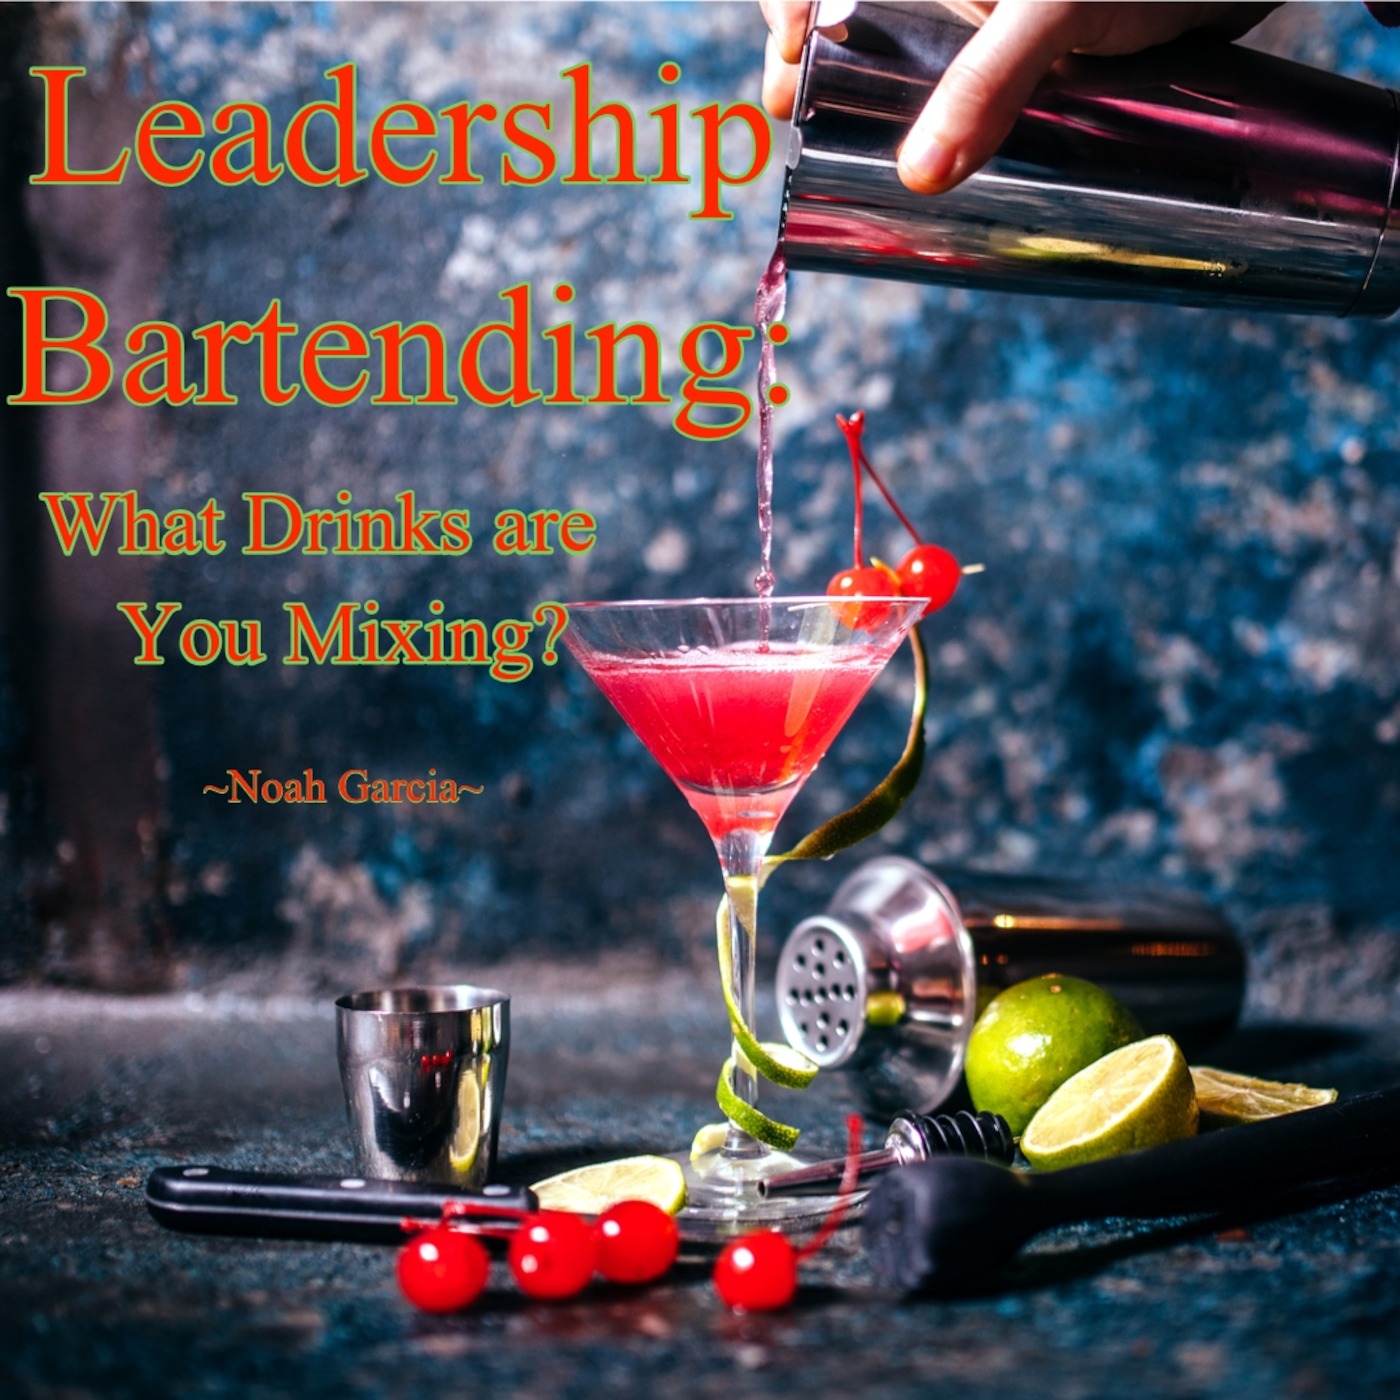 Leadership Bartending: What Drinks are You Mixing?